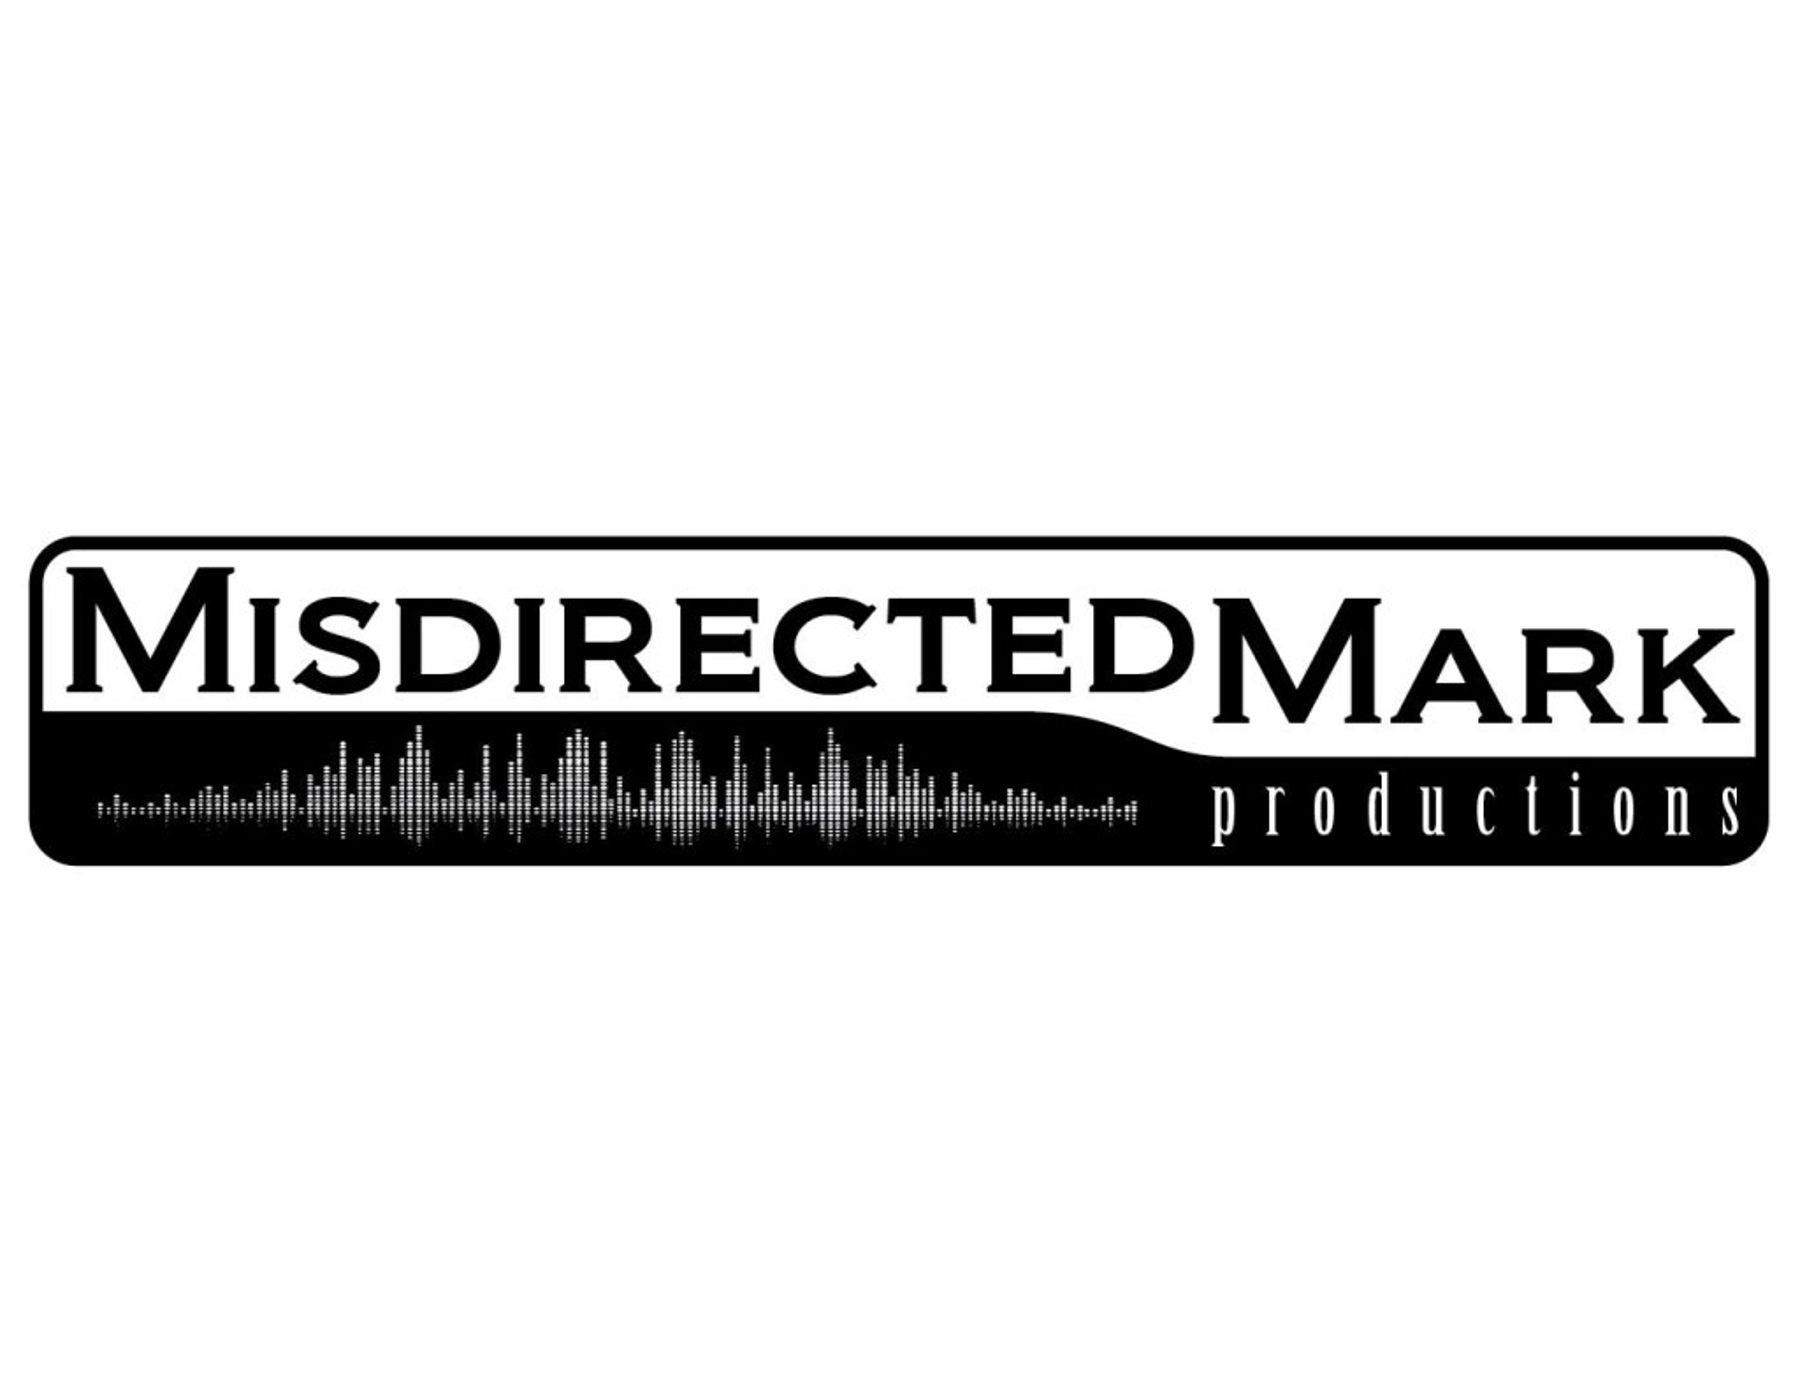 Misdirected Mark Productions